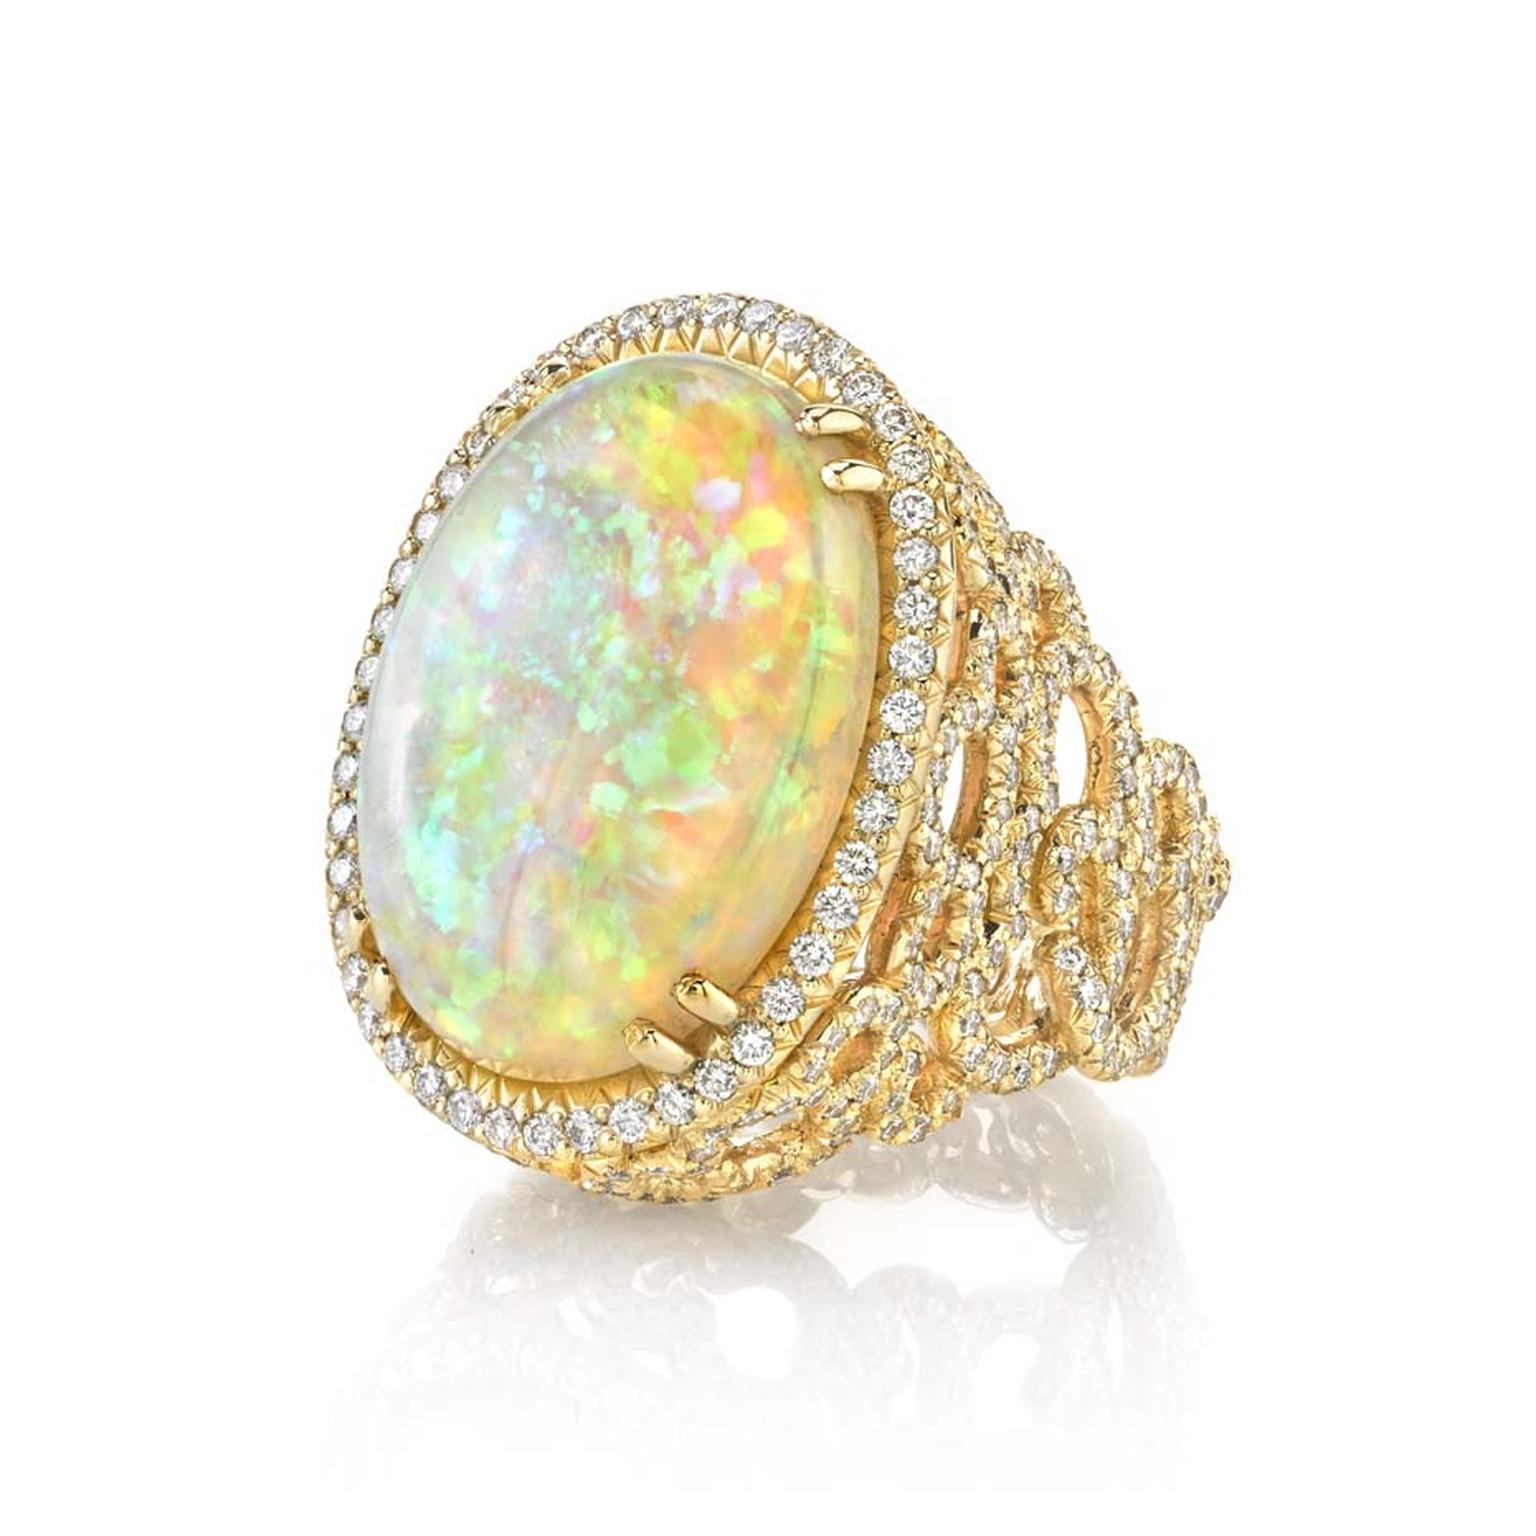 Erica Courtney Opal Cloud ring in gold, set with a 10.33ct